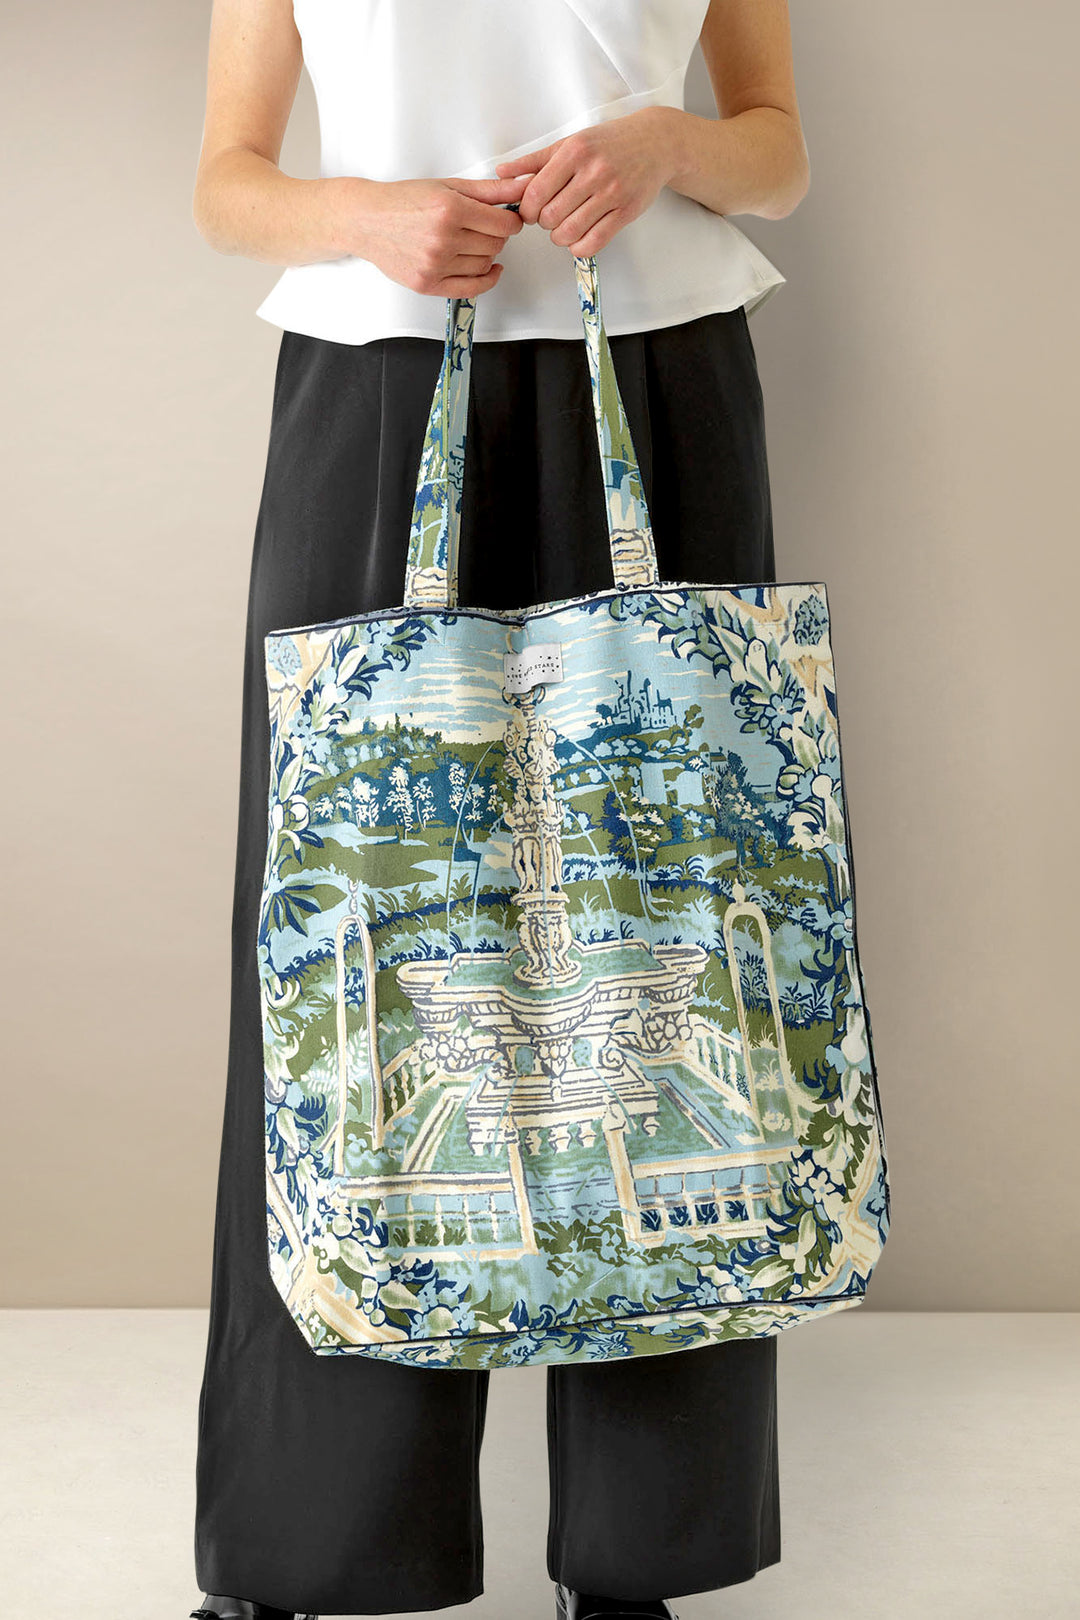 ladies canvas tote bag shopping large beautiful garden scenes in sea greens and blues by One Hundred Stars